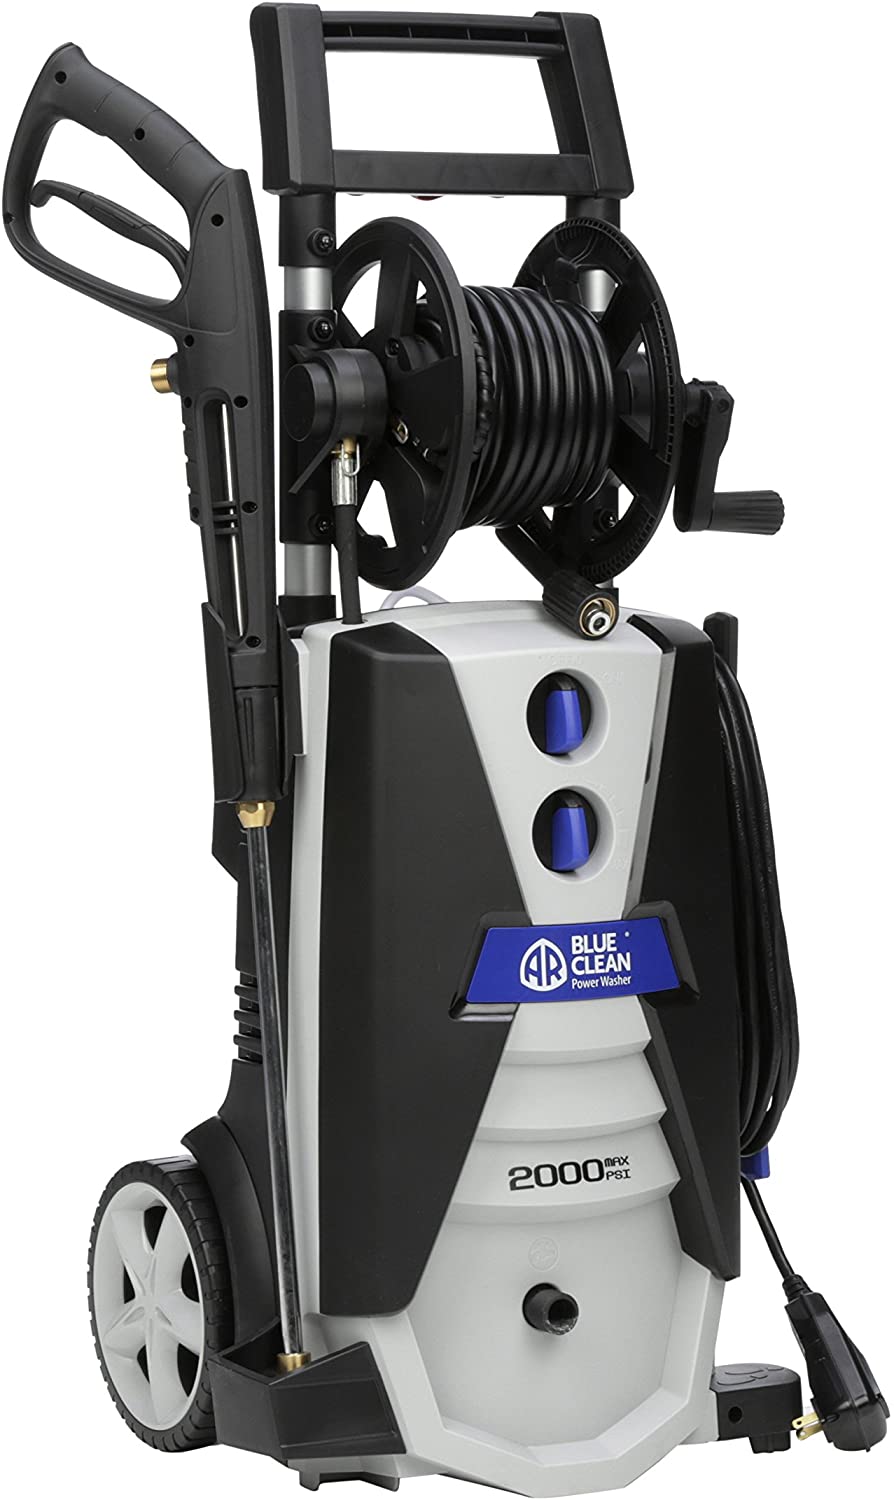 Best Electric Pressure Washer For Cars